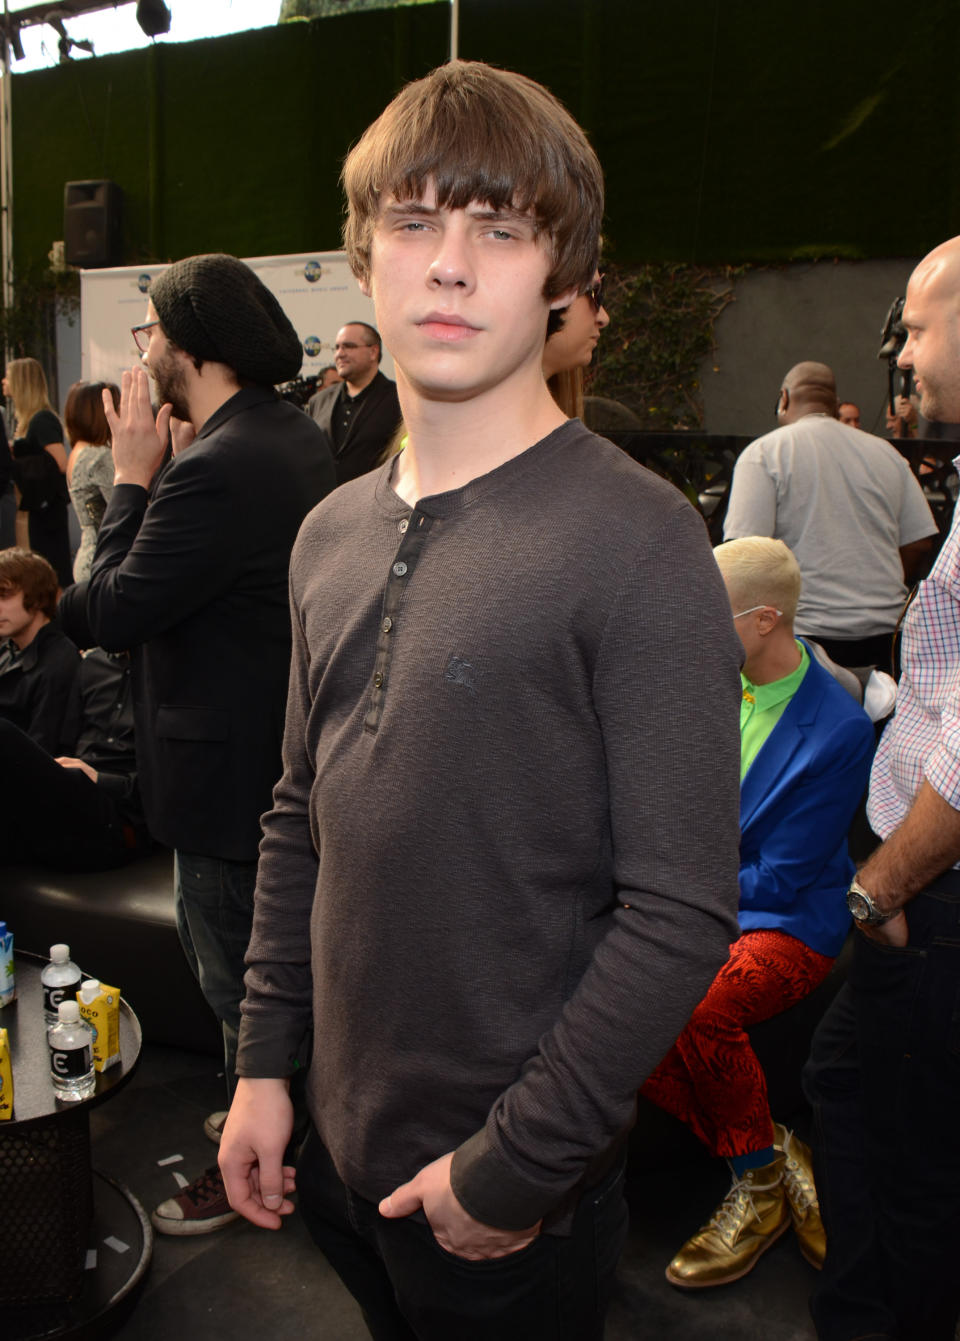 Jake Bugg seen at Universal Music Brunch to Celebrate the 56th Annual GRAMMY Awards, on Saturday, Jan. 25, 2014 in Hollywood, Calf. (Photo by Tonya Wise/Invision/AP)